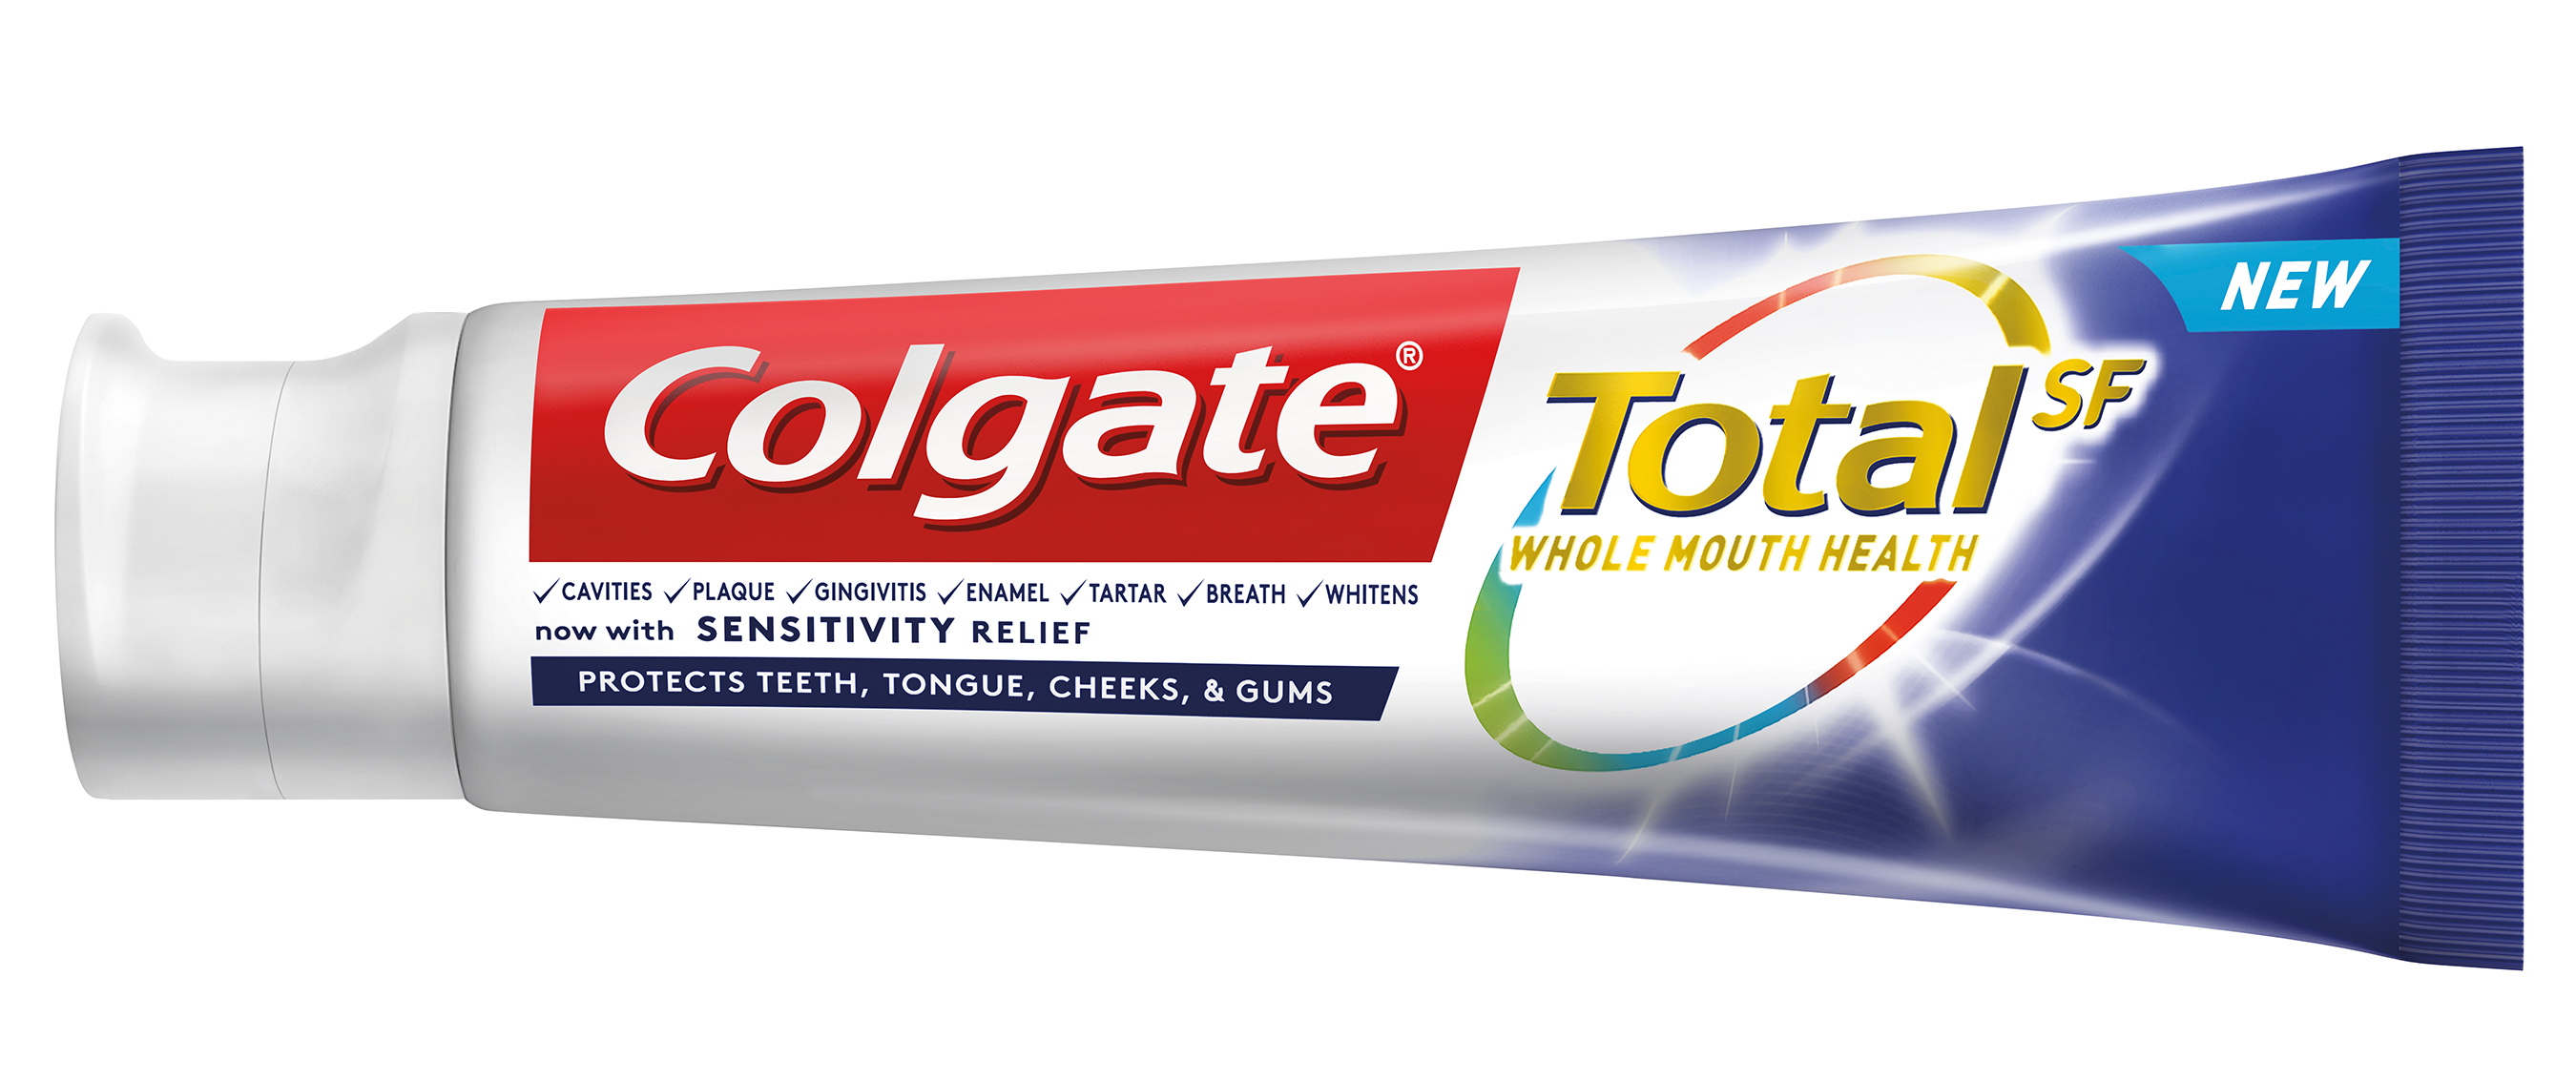 Colgate Total(SF)'s new breakthrough formula takes care of everything ? from reducing sensitivity to strengthening enamel ? in one product